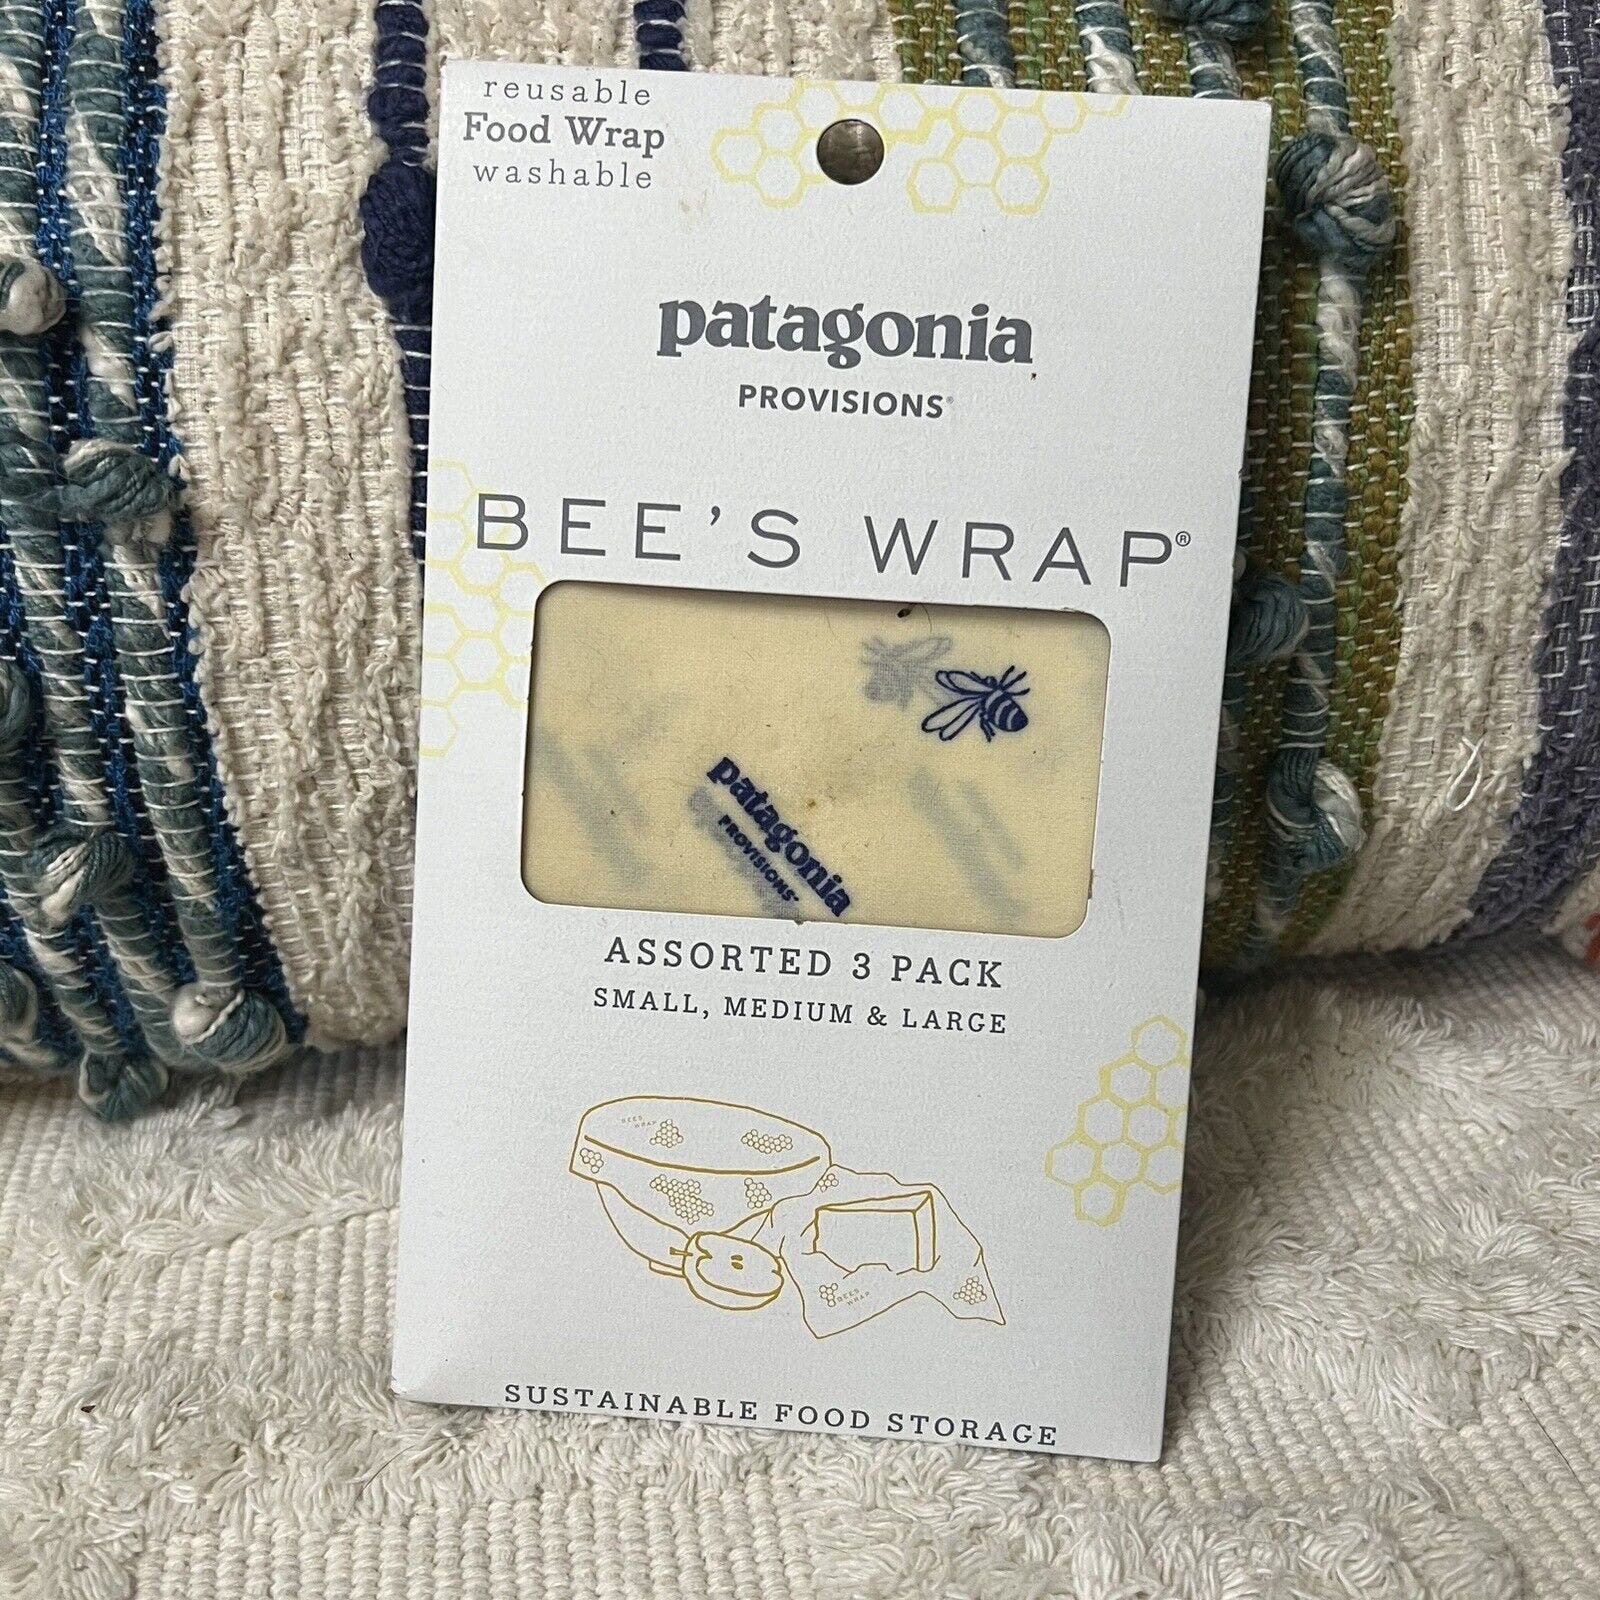 Patagonia Provisions Bee’s Food Wraps Assorted 3 Pack S M Washable Reusable dlPPYKJCE